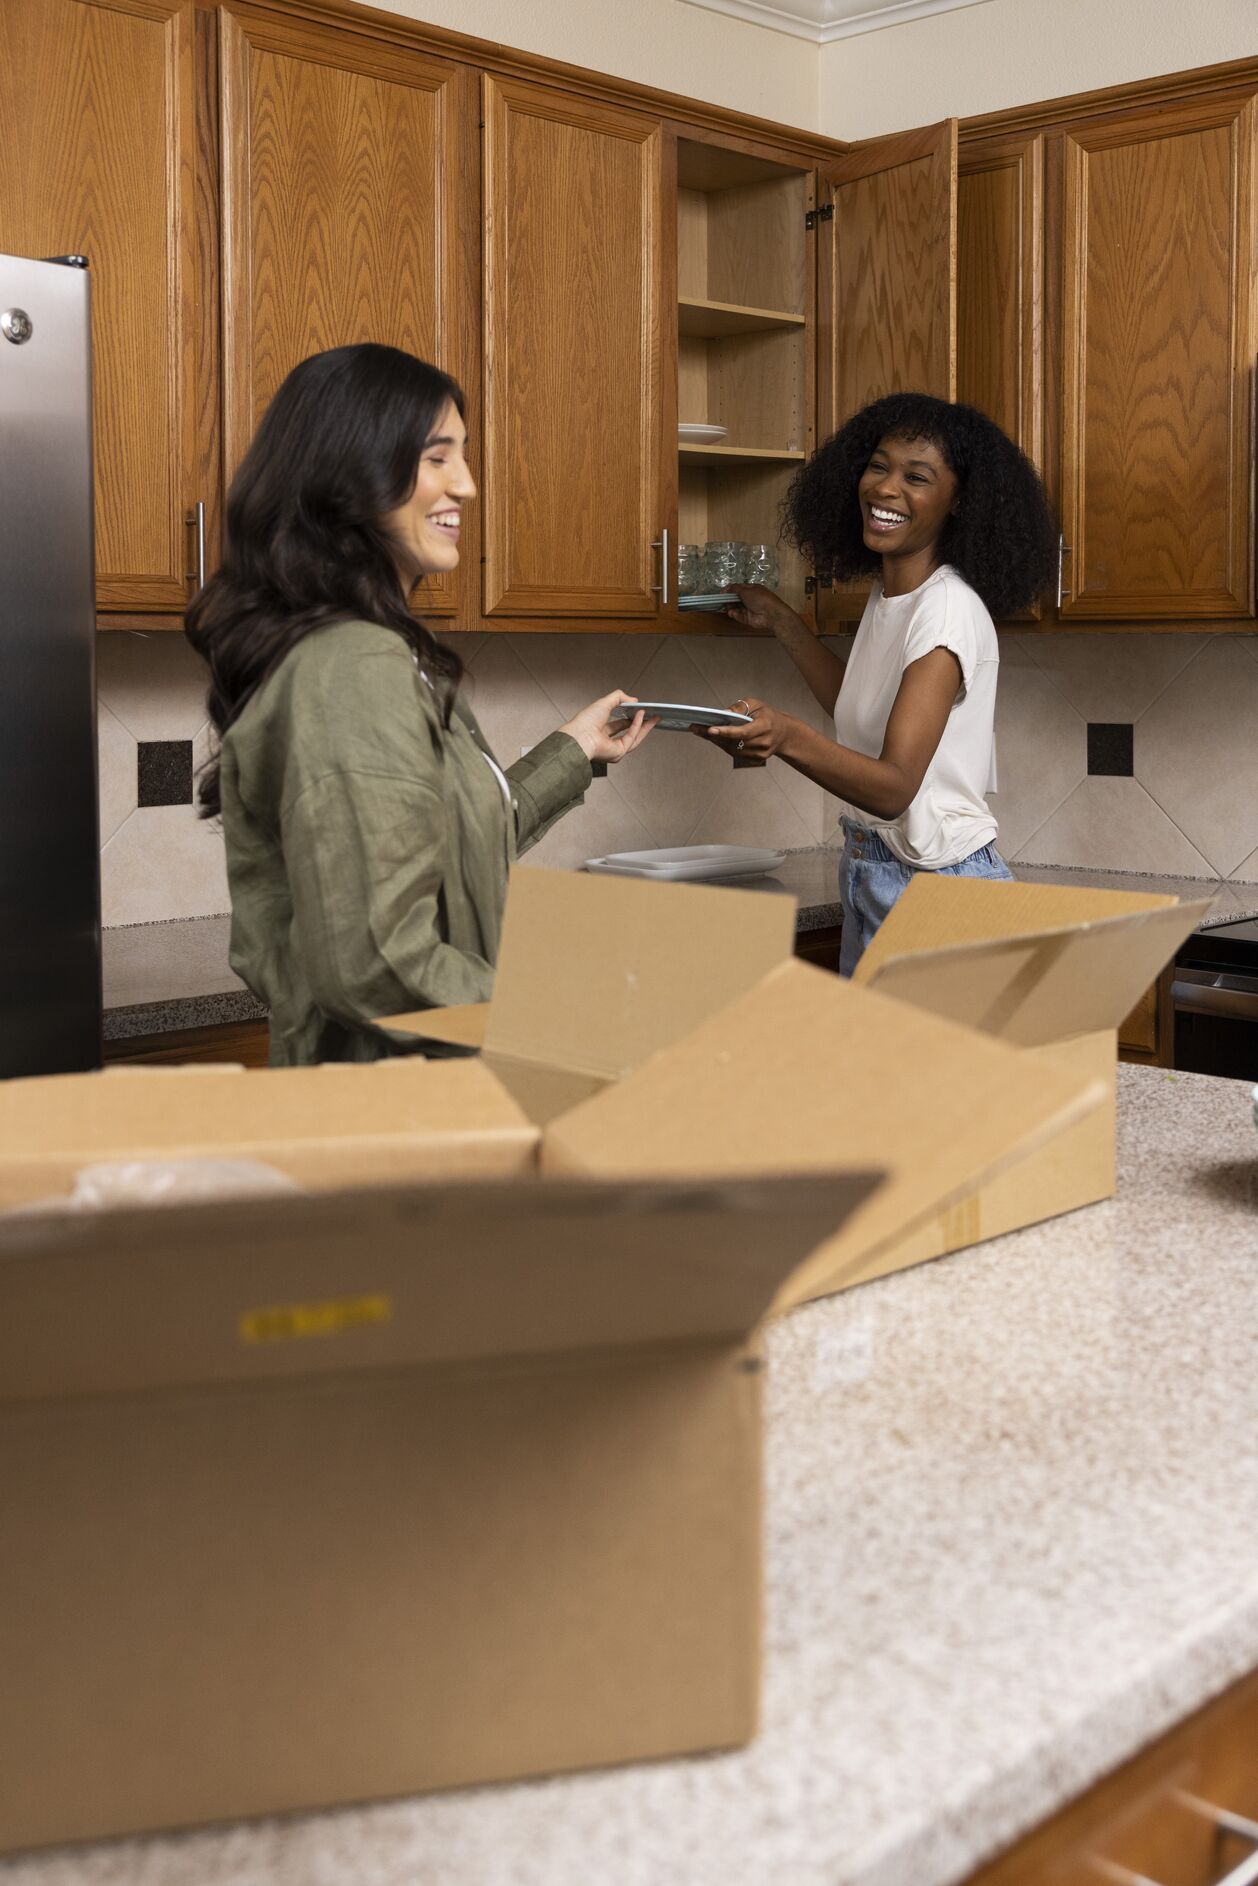 Roommates move in to a Fairfield community